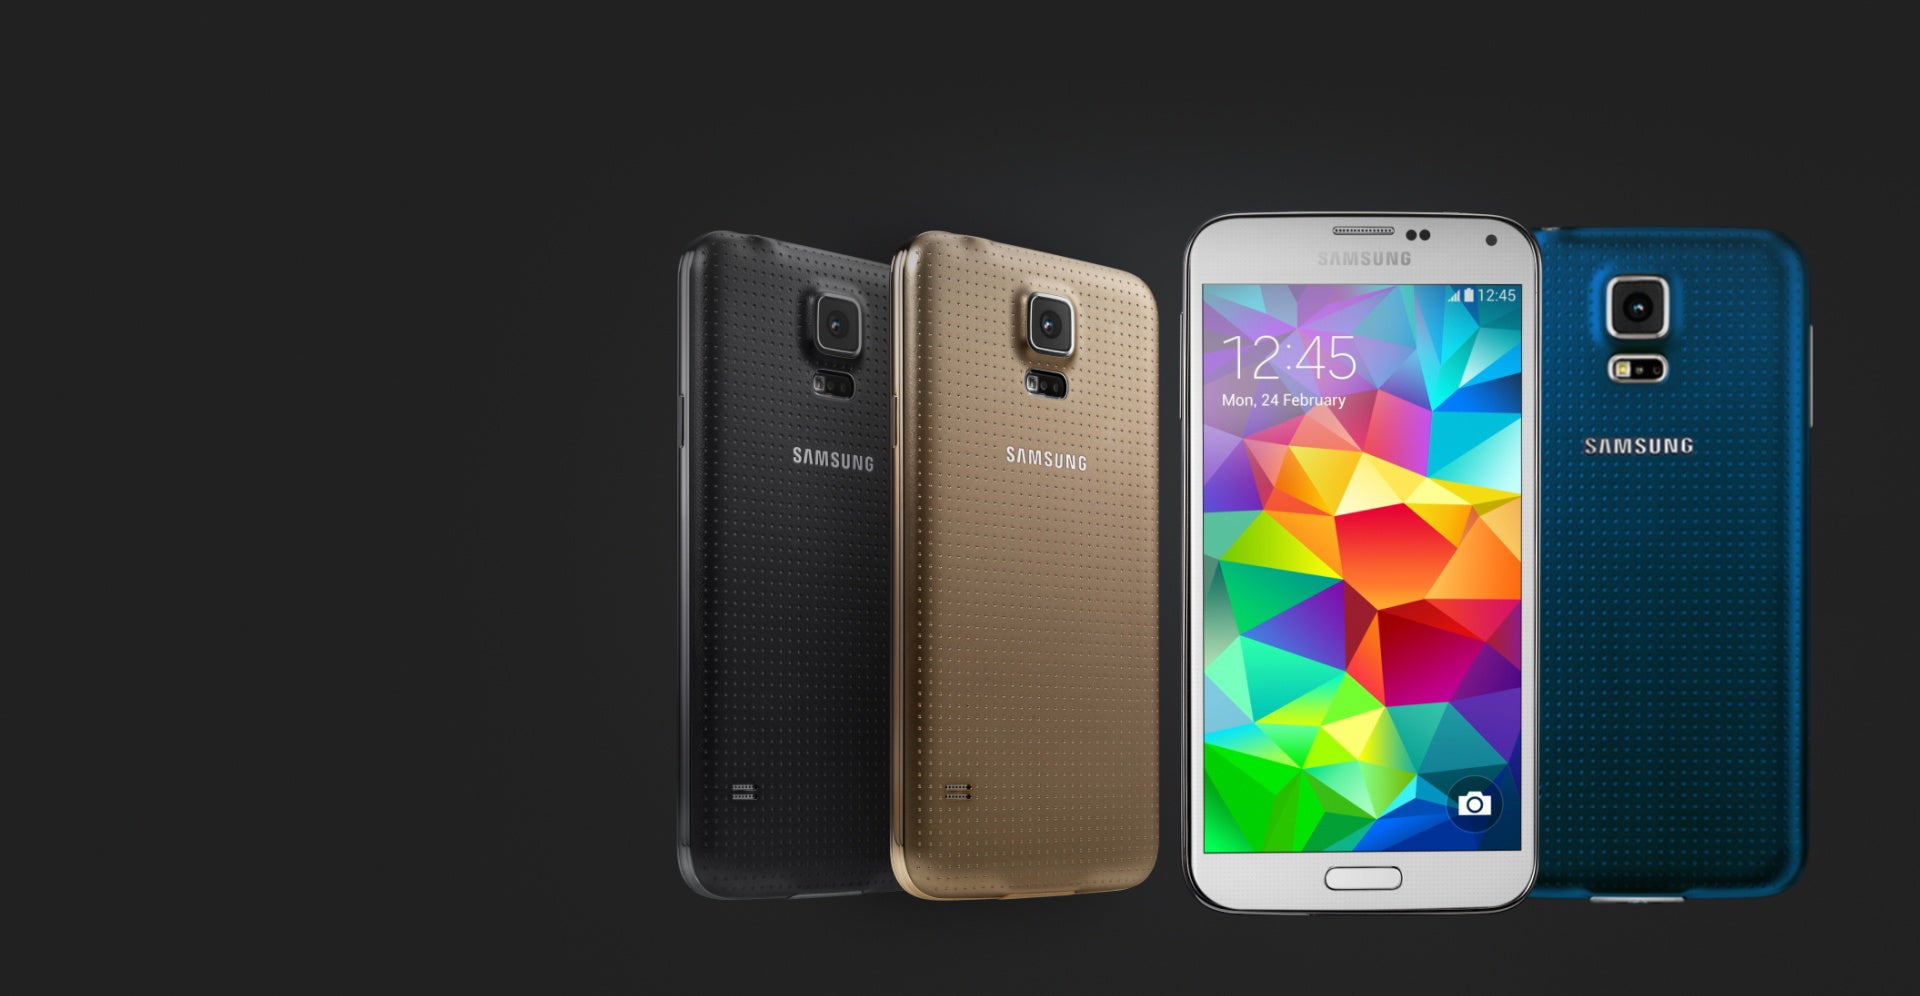 Samsung pushes out July security update to Galaxy S5